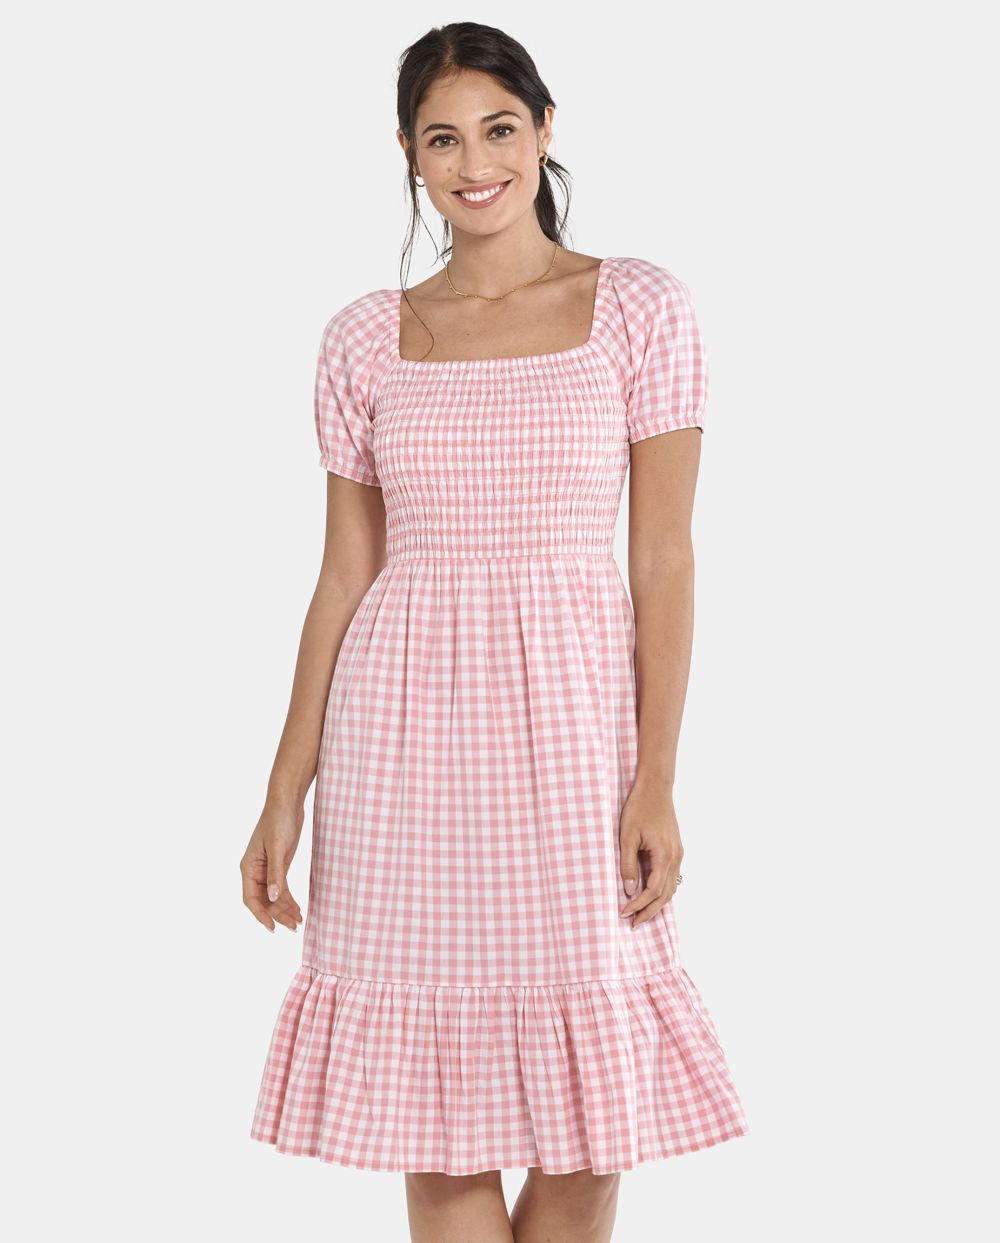 Above the Knee Smocked Square Neck Checkered Gingham Print Tiered Puff Sleeves Sleeves Dress